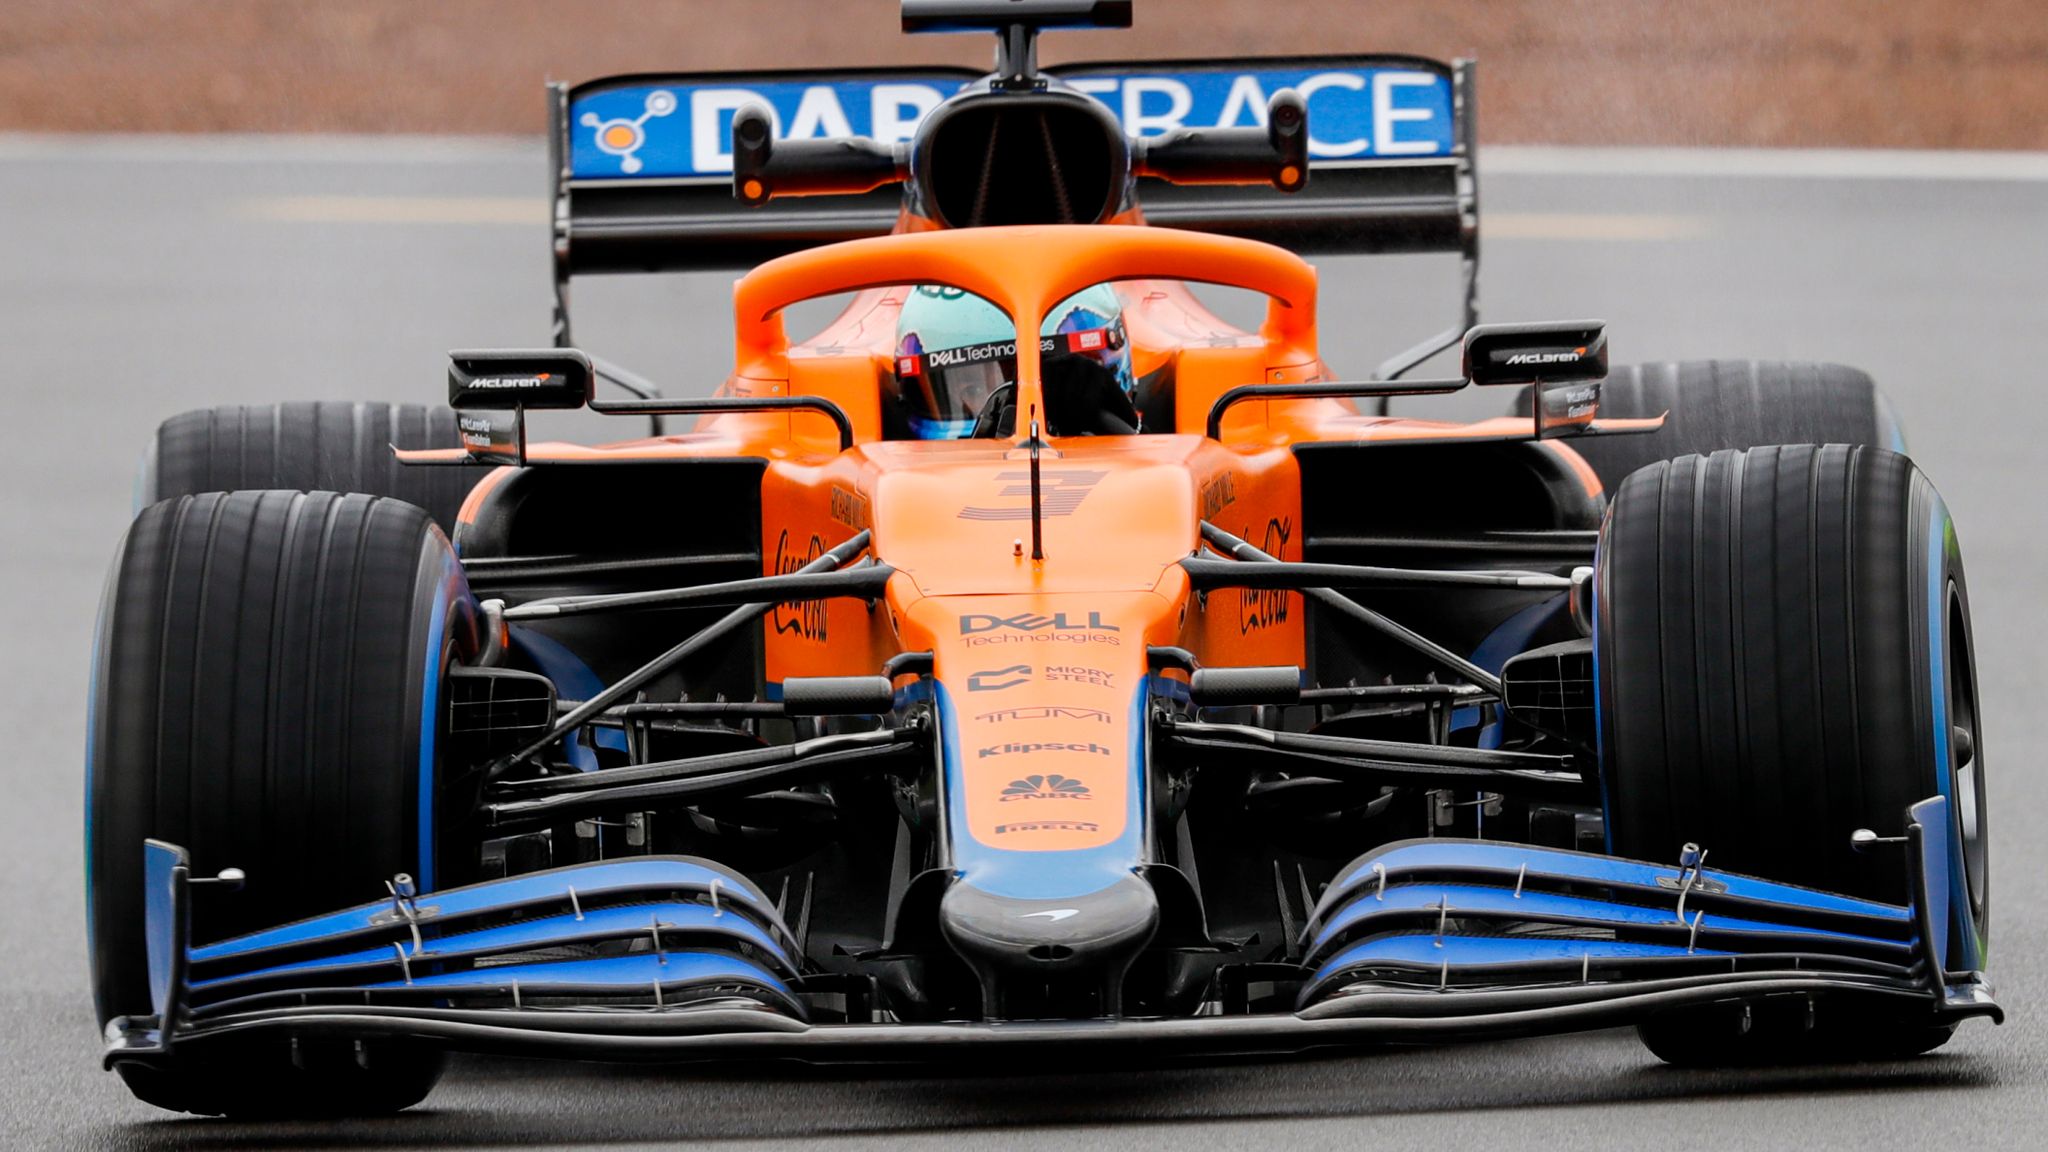 Mclaren Hit The Track For First Time With New Mercedes Powered Mcl35m F1 Car At Silverstone F1 News